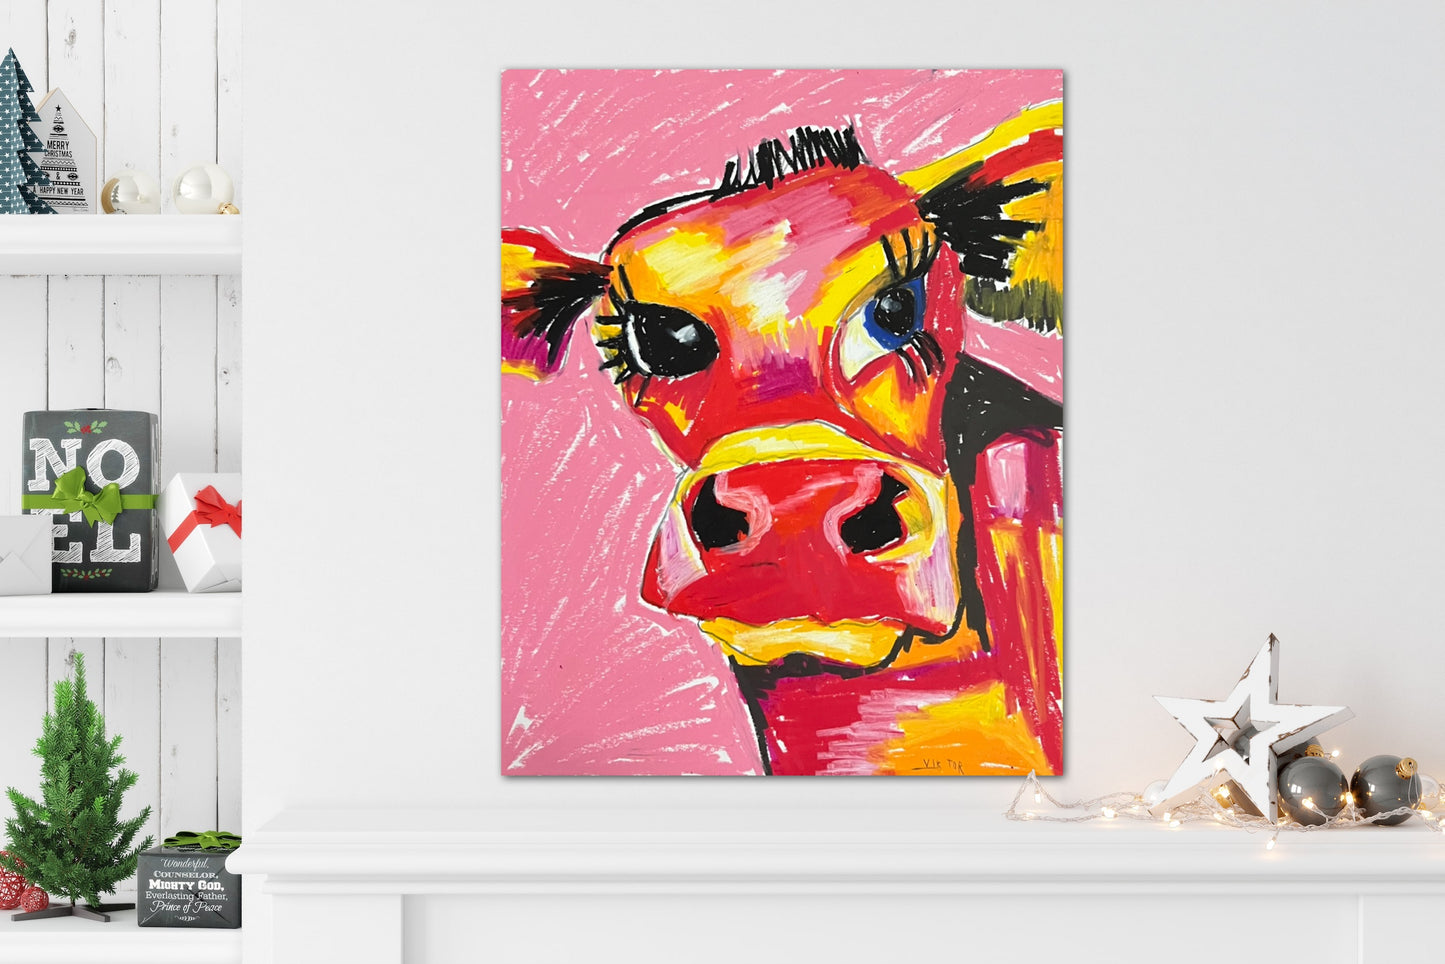 Red Cow - fine prints and canvas prints in more size